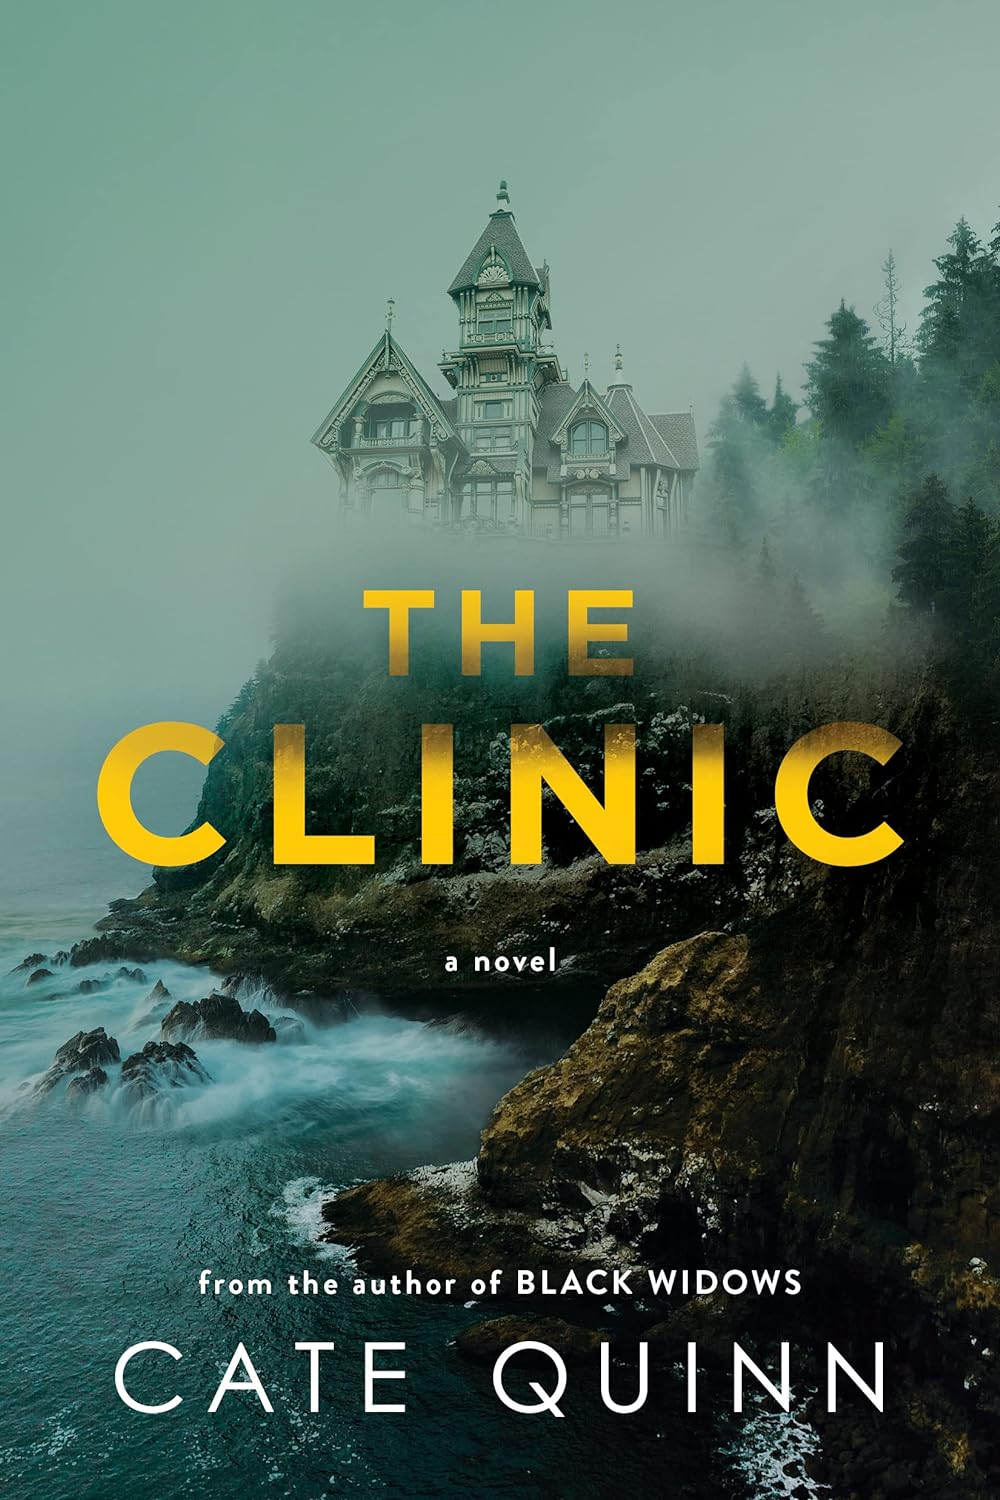 Image for "The Clinic"